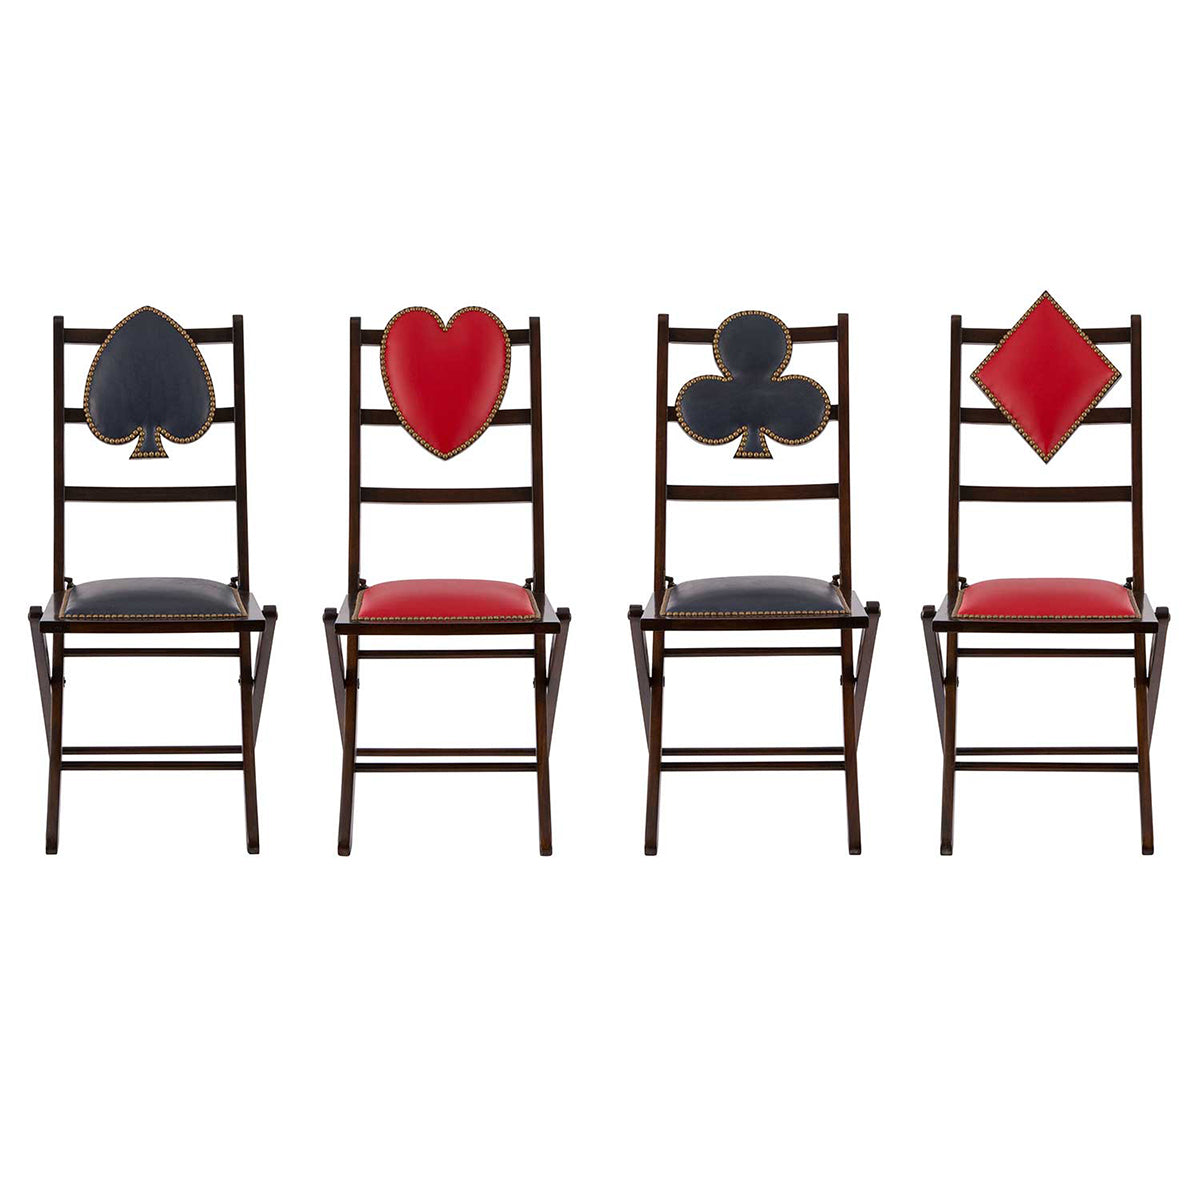 Set of 4 Card Chairs